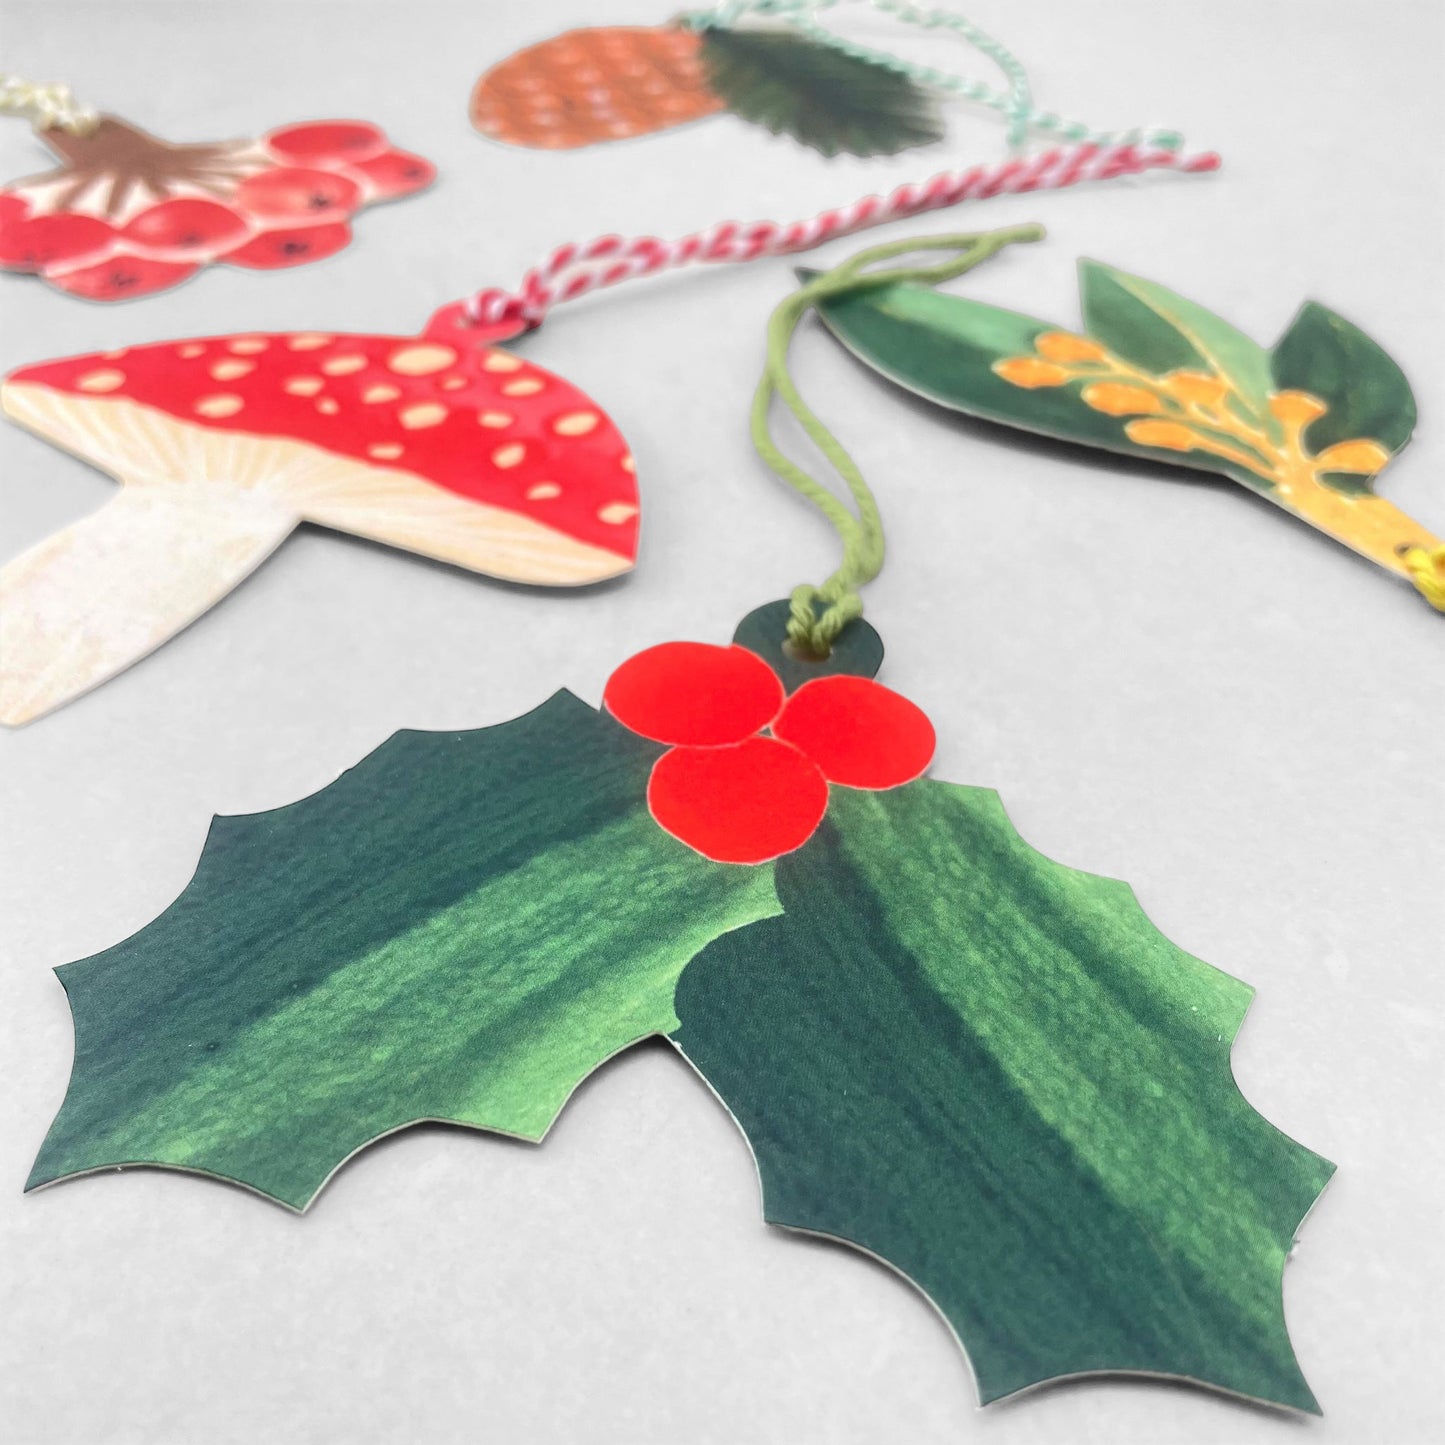 A set of five different festive plant gift tags in red, green and yellow with colourful sttring, by Hadley Paper Goods, pictured a holly leaf